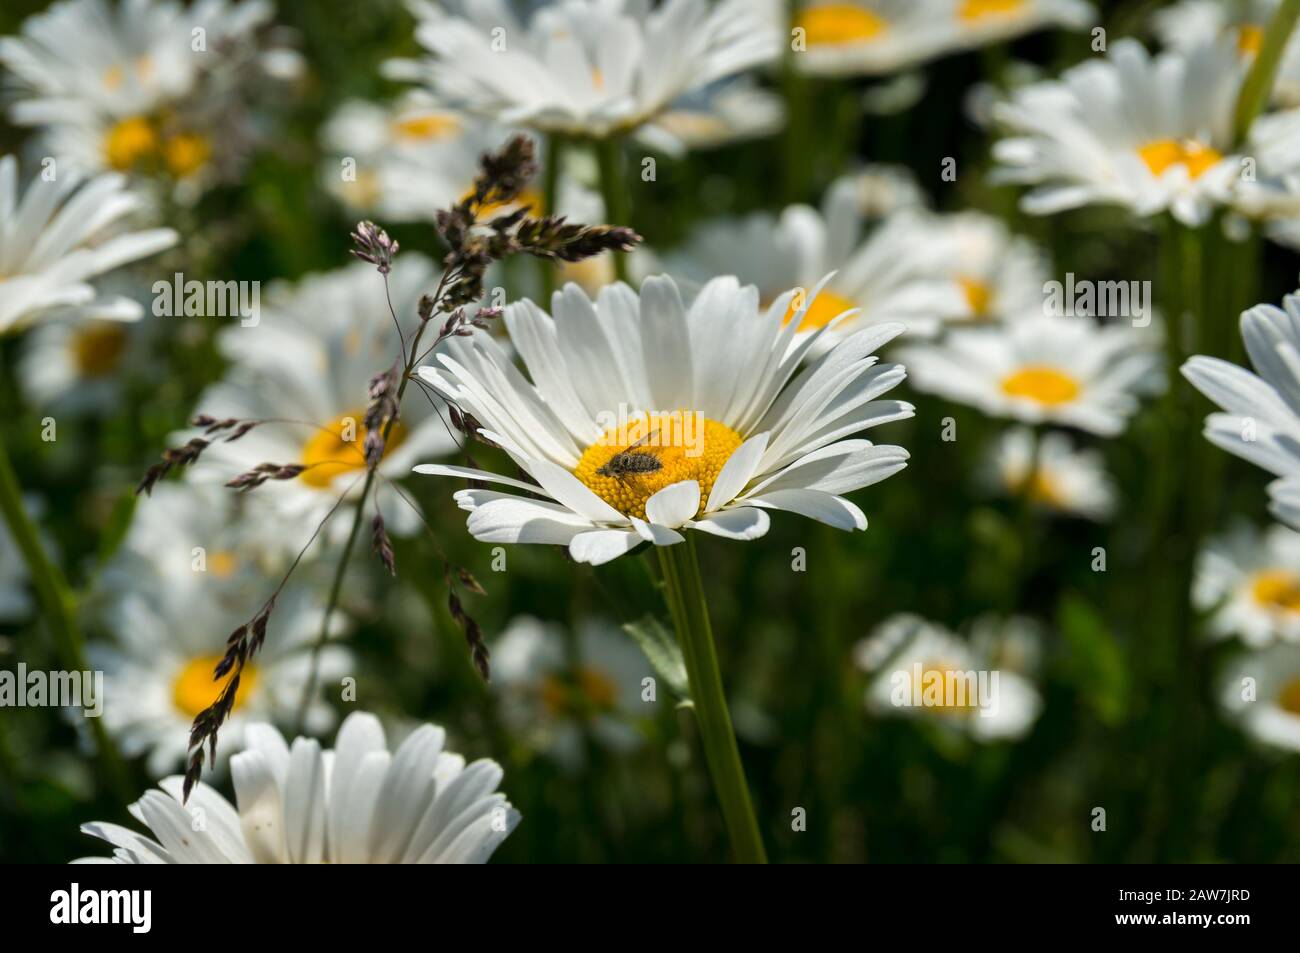 Close up of white and yellow daisy flower with honey bee collecting pollen. Floral nature background Stock Photo